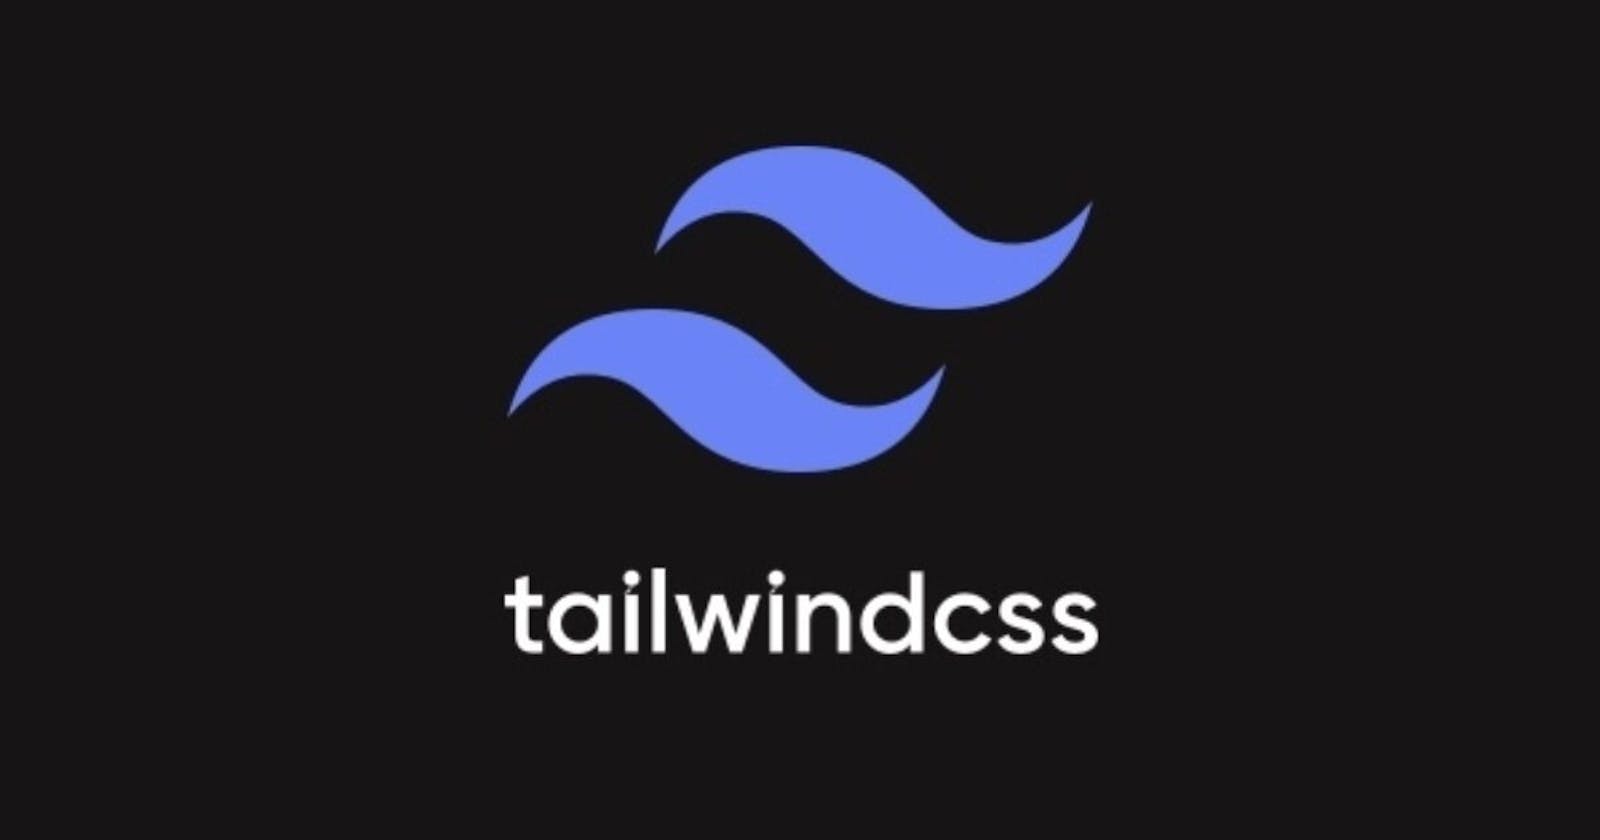 Why is Tailwind CSS better than CSS3?